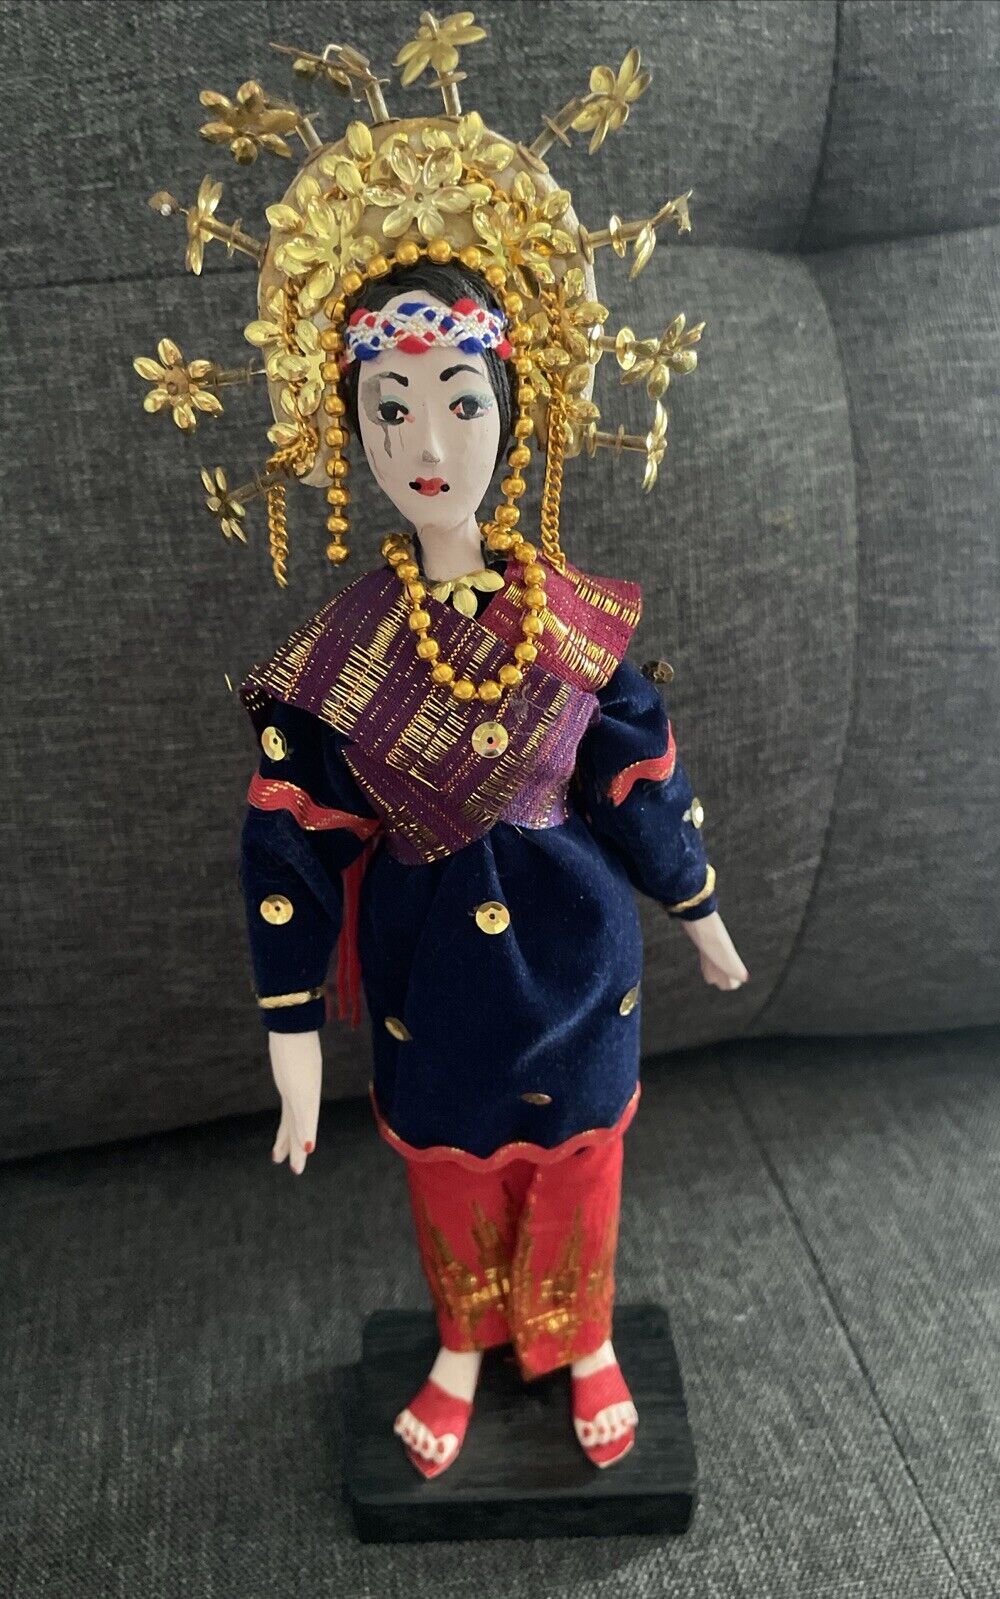 Vintage Beautiful Asian Doll with headdress.  Handmade and painted on wood block